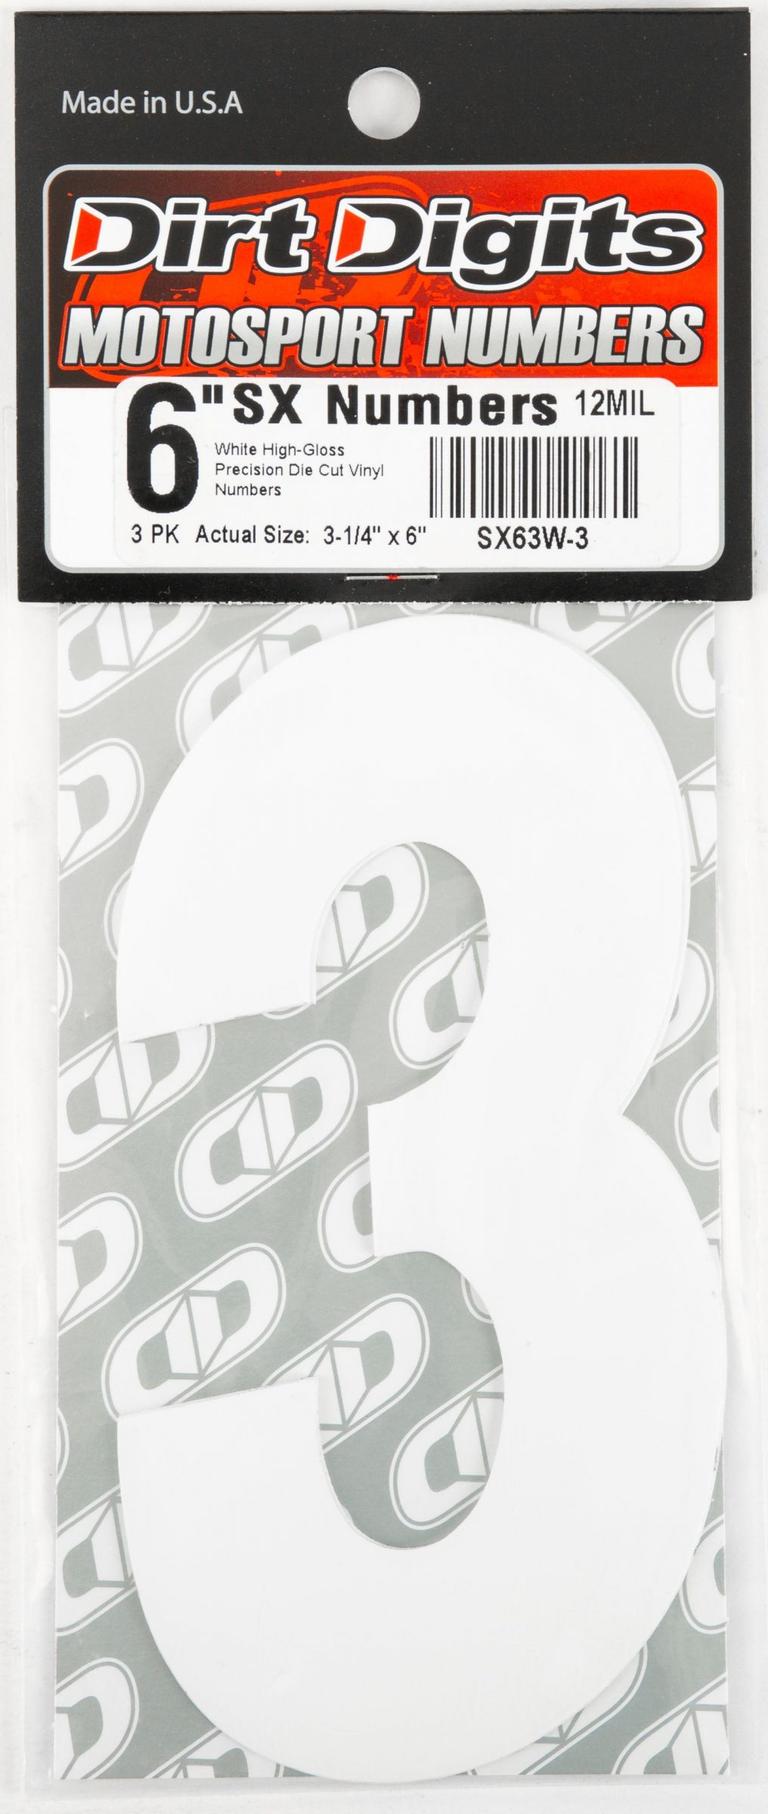 8AG2-DIRT-DIGITS-SX63W-3 Super X Competition Stick-On 6in. White Number - 3